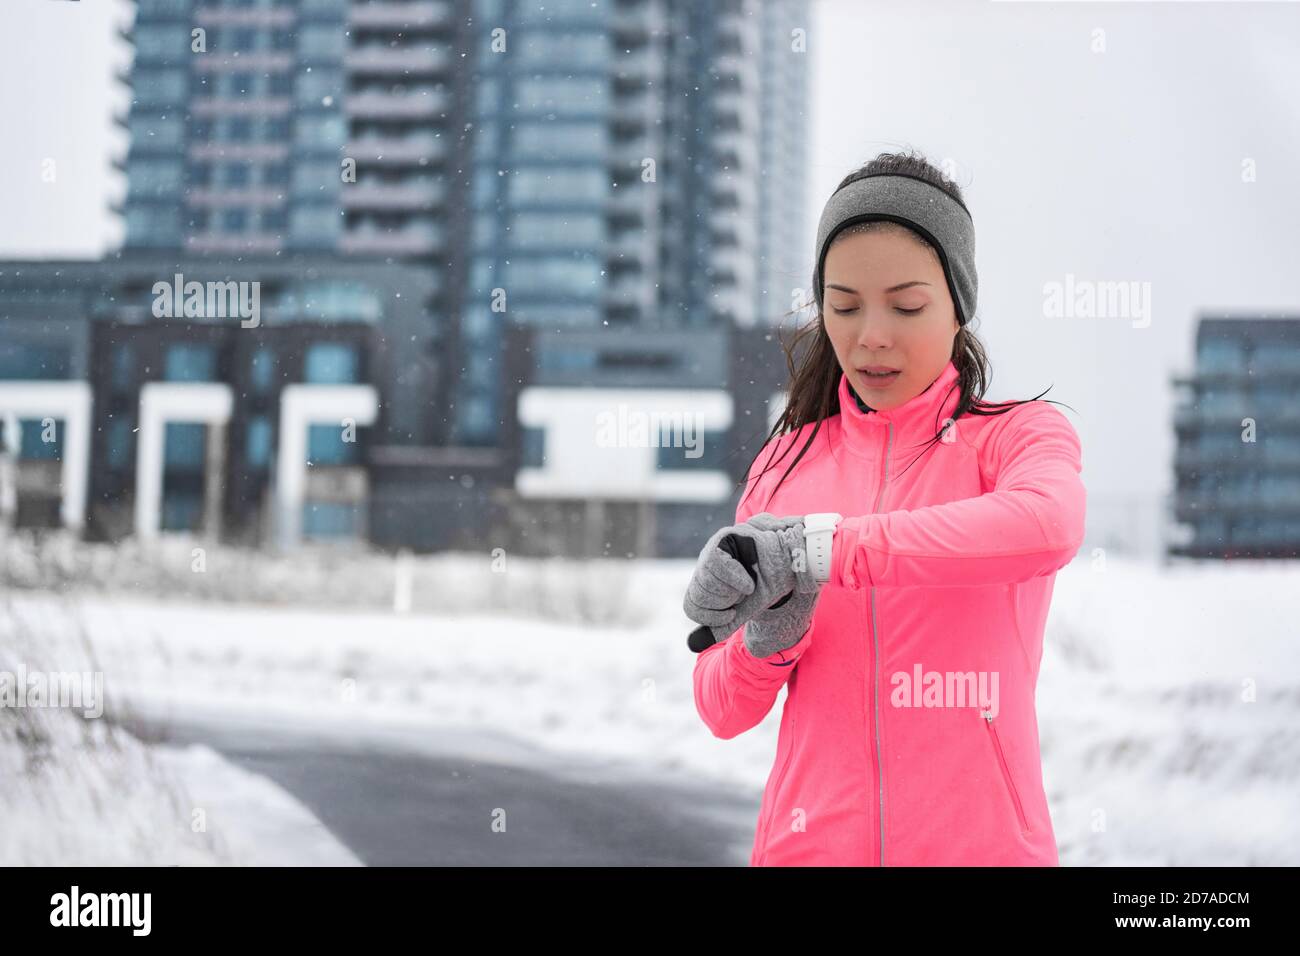 Winter running smartwatch fitness girl in cold snow weather jogging outside on street wearing smart watch and windproof clothes with gloves, headband Stock Photo